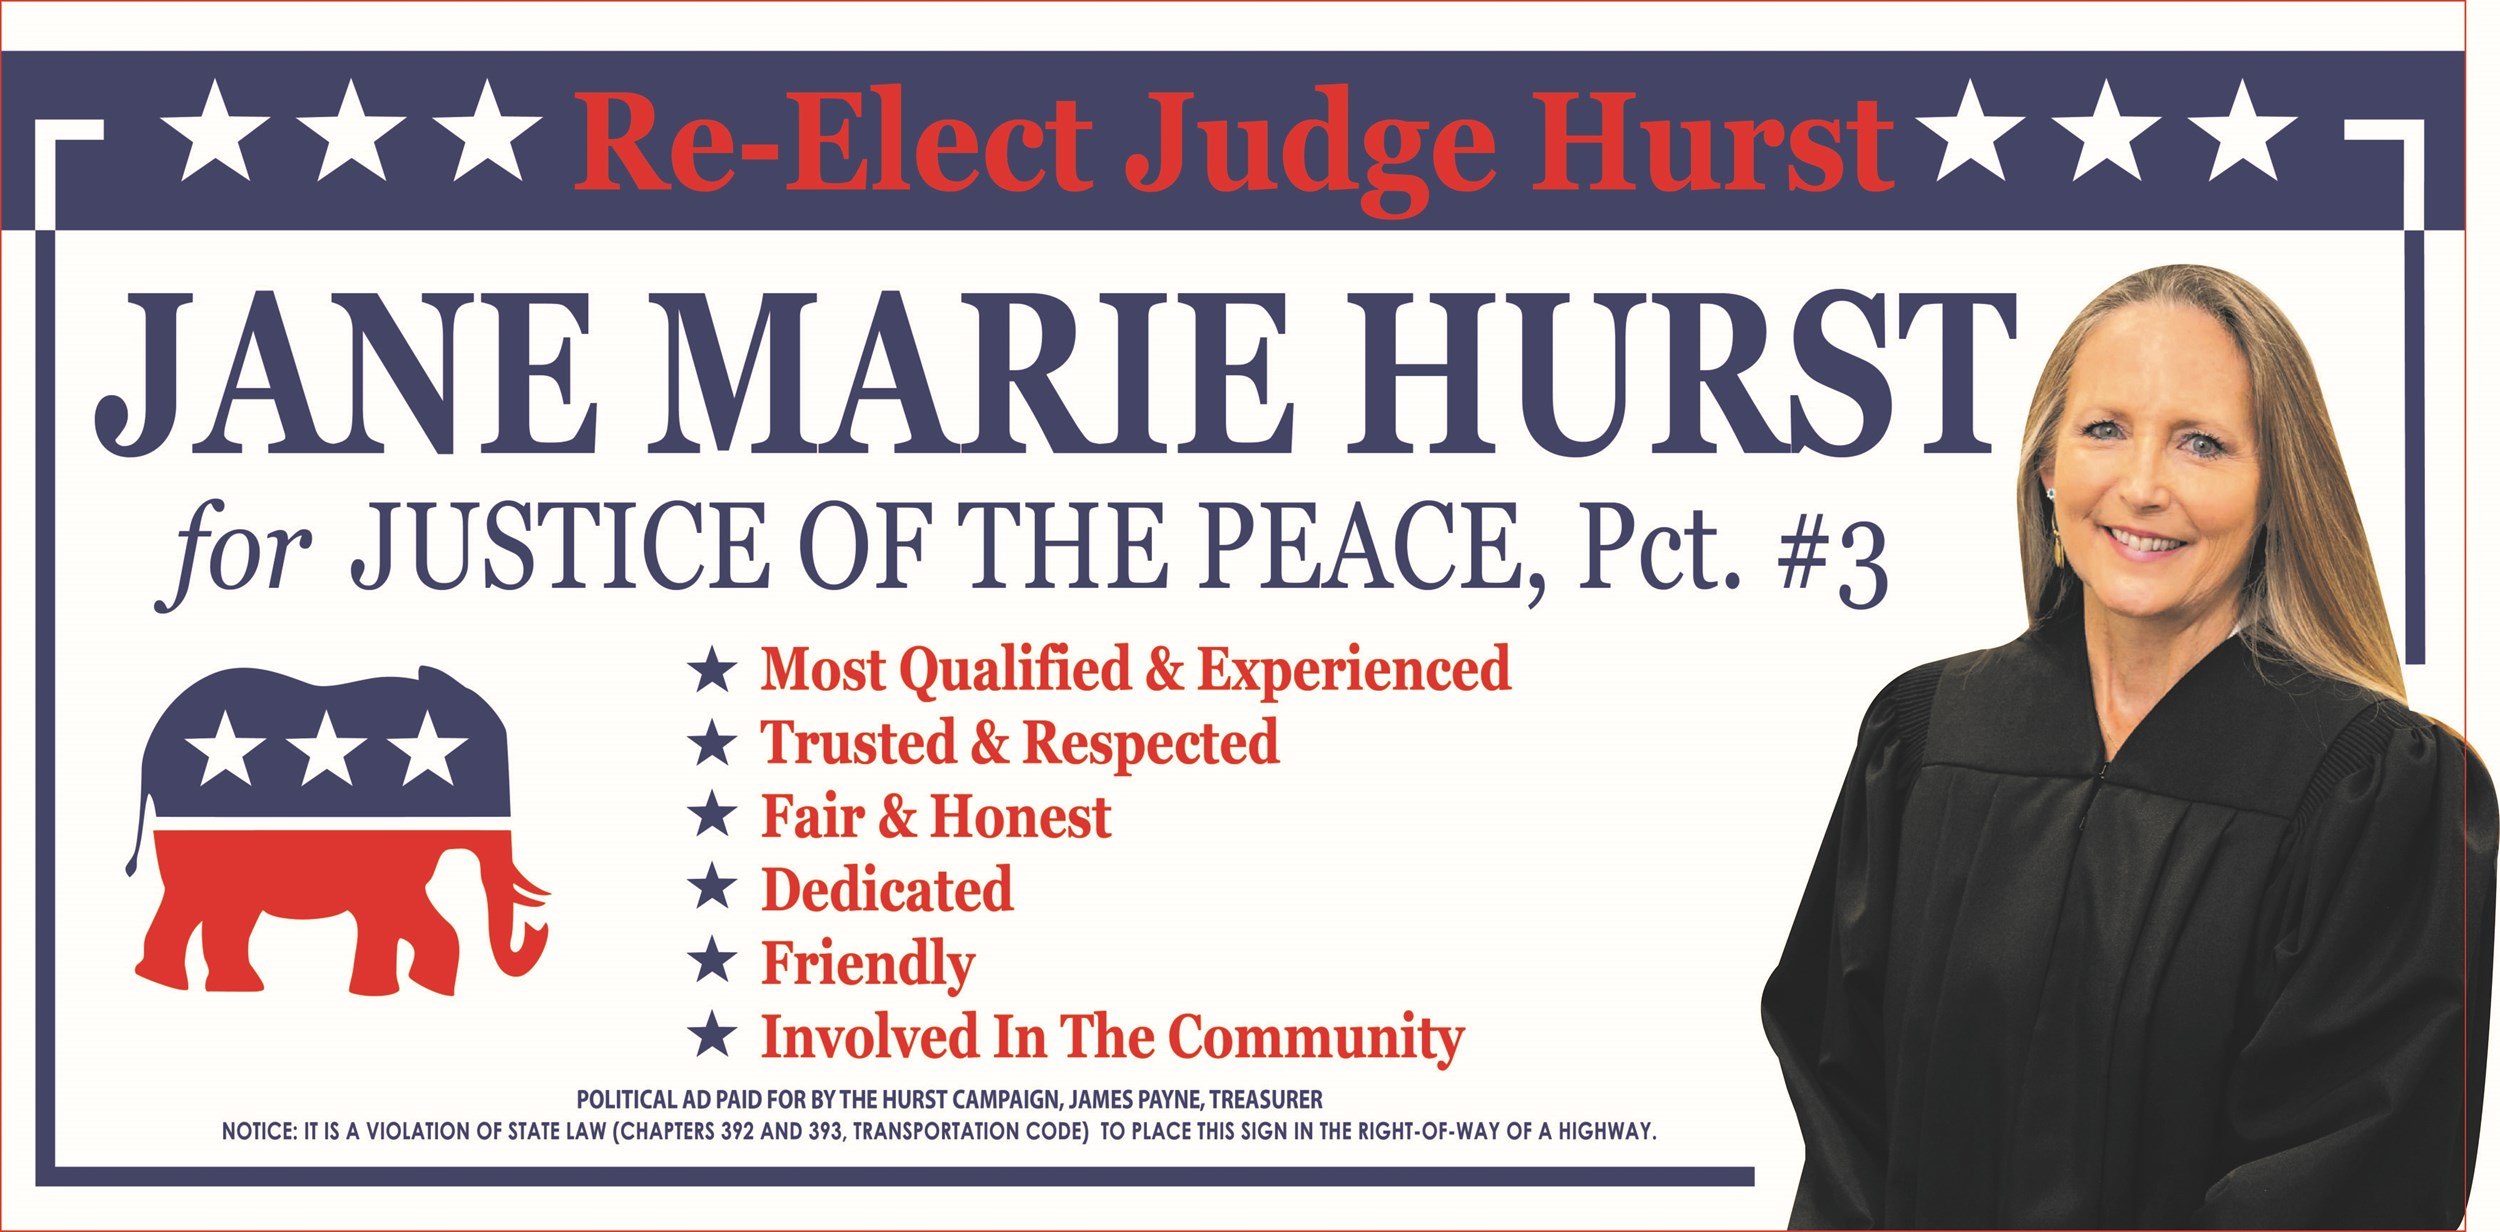 Re-Elect Jane Marie Hurst for Justice of the Peace #3